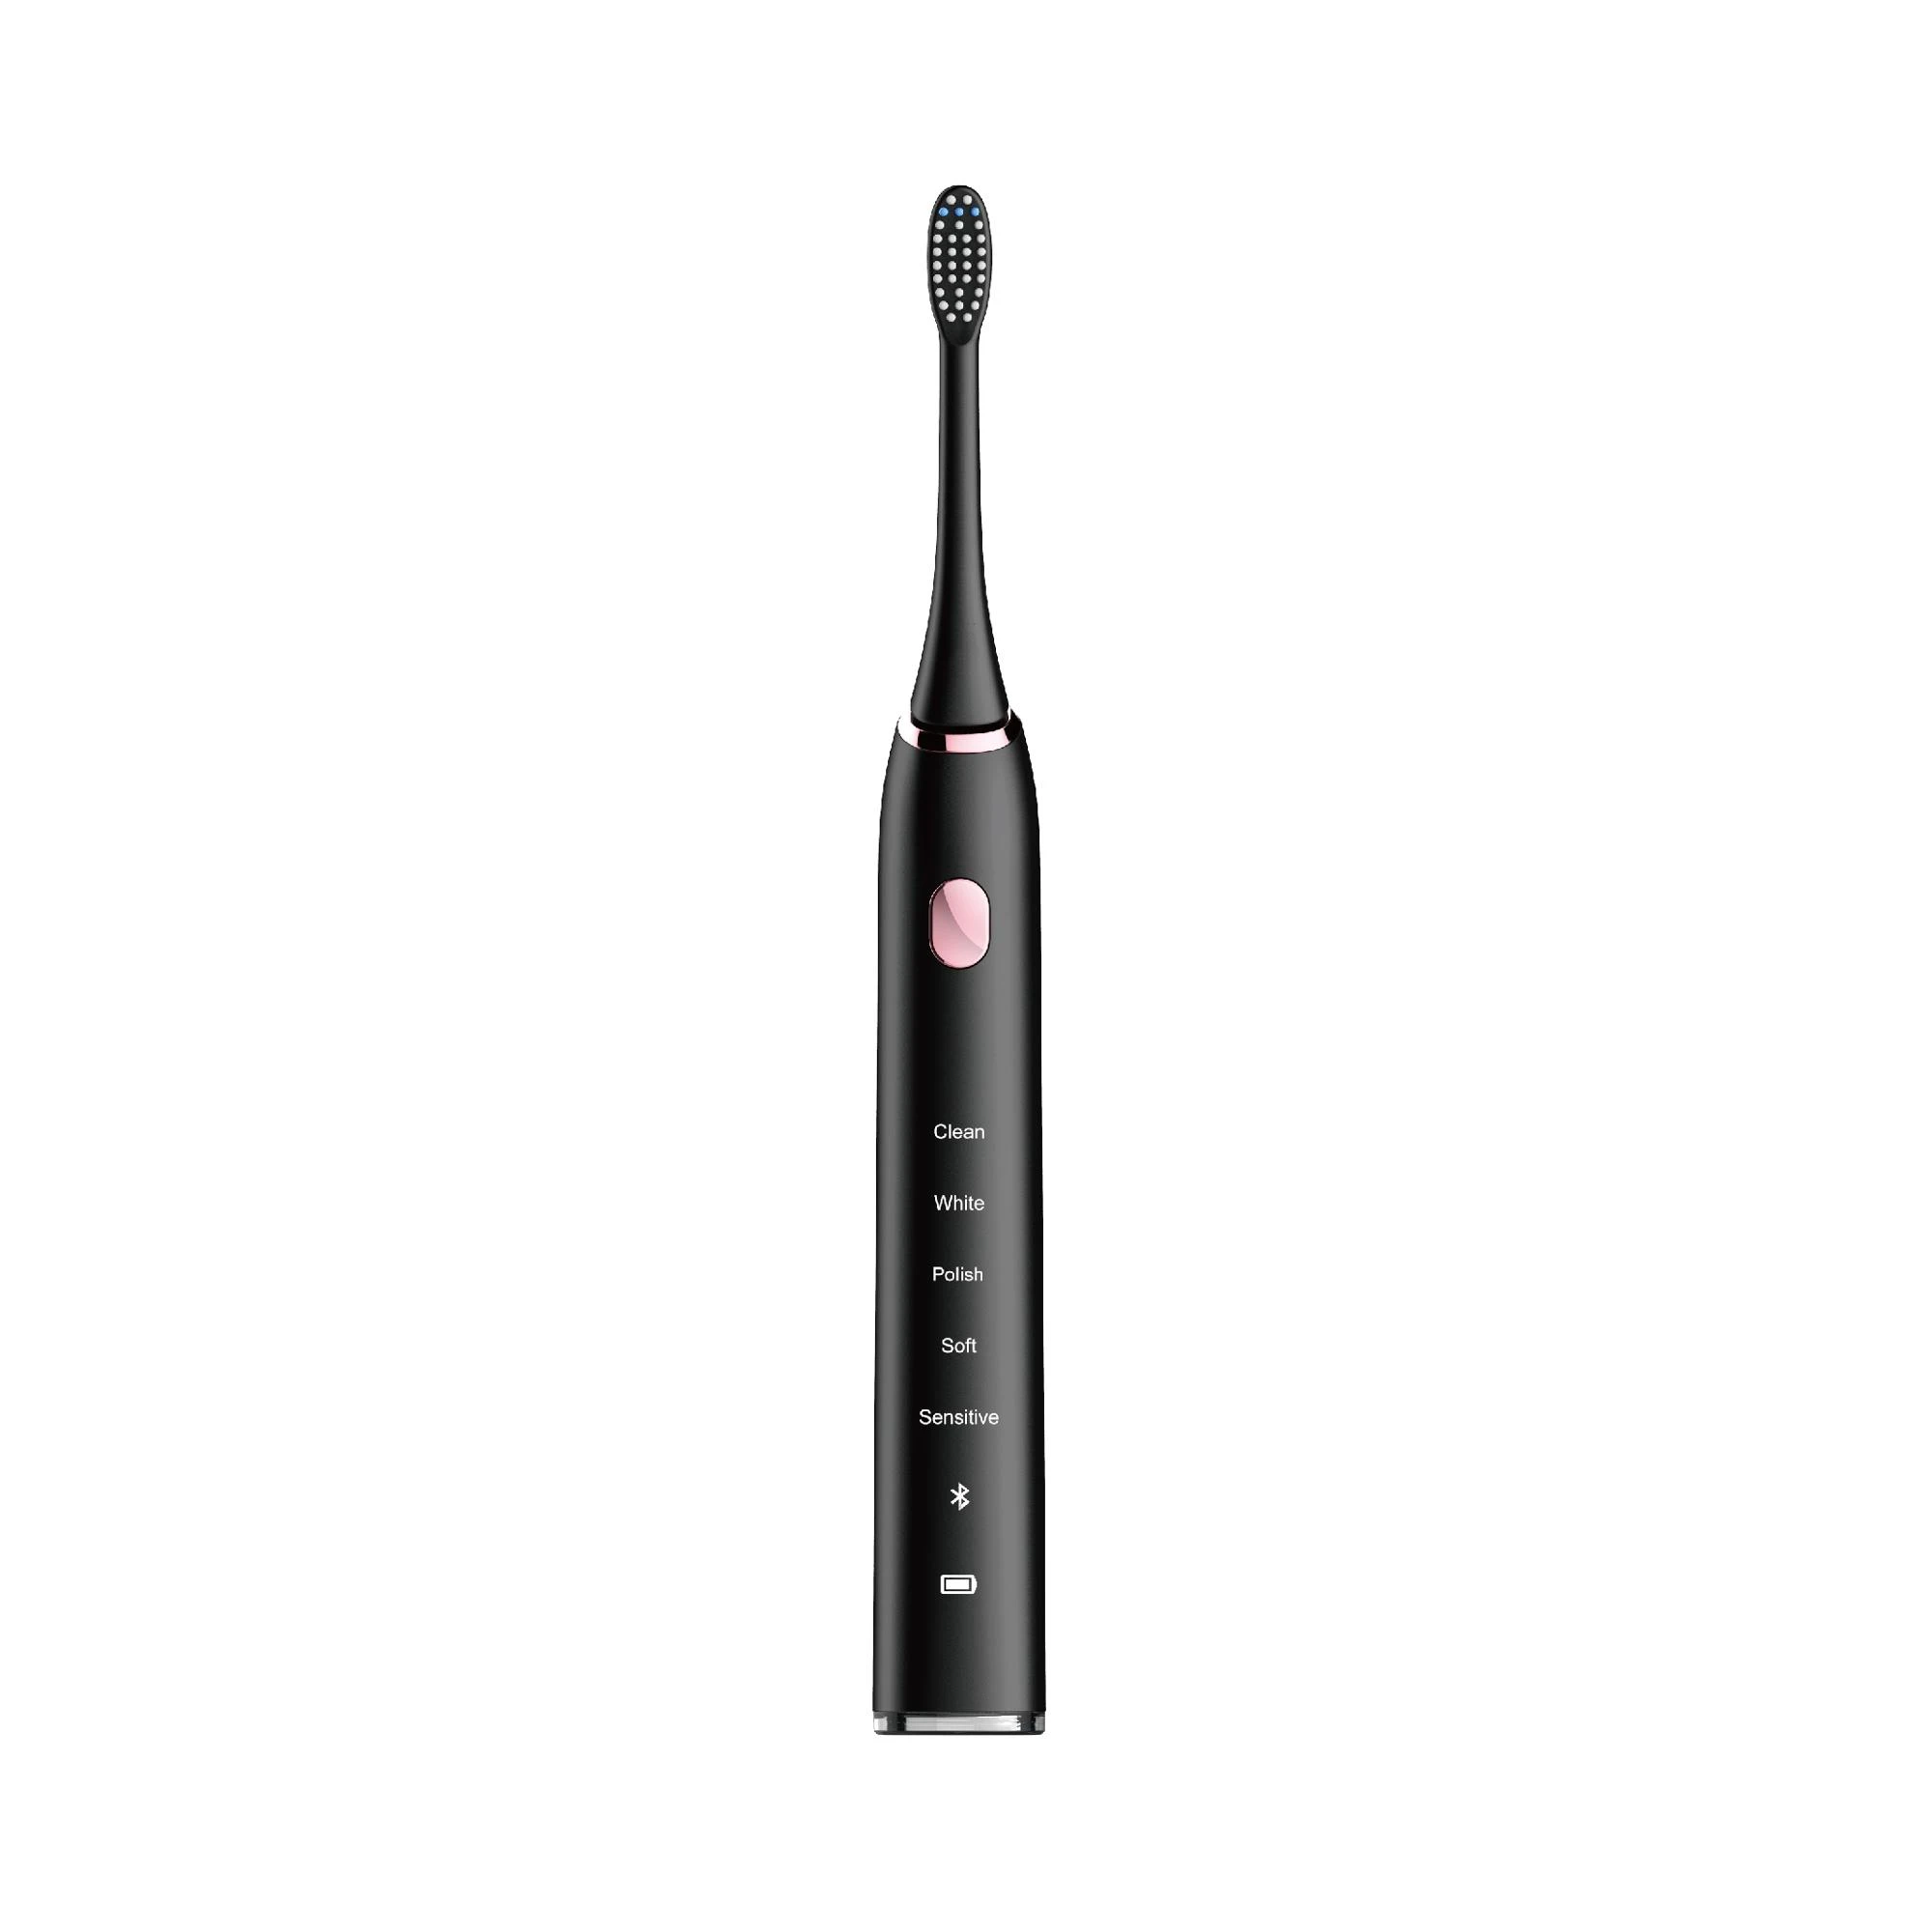 J-Style 2021 Custom Logo Vibration Replacement Brush Heads Electric smart oral Sonic Toothbrush